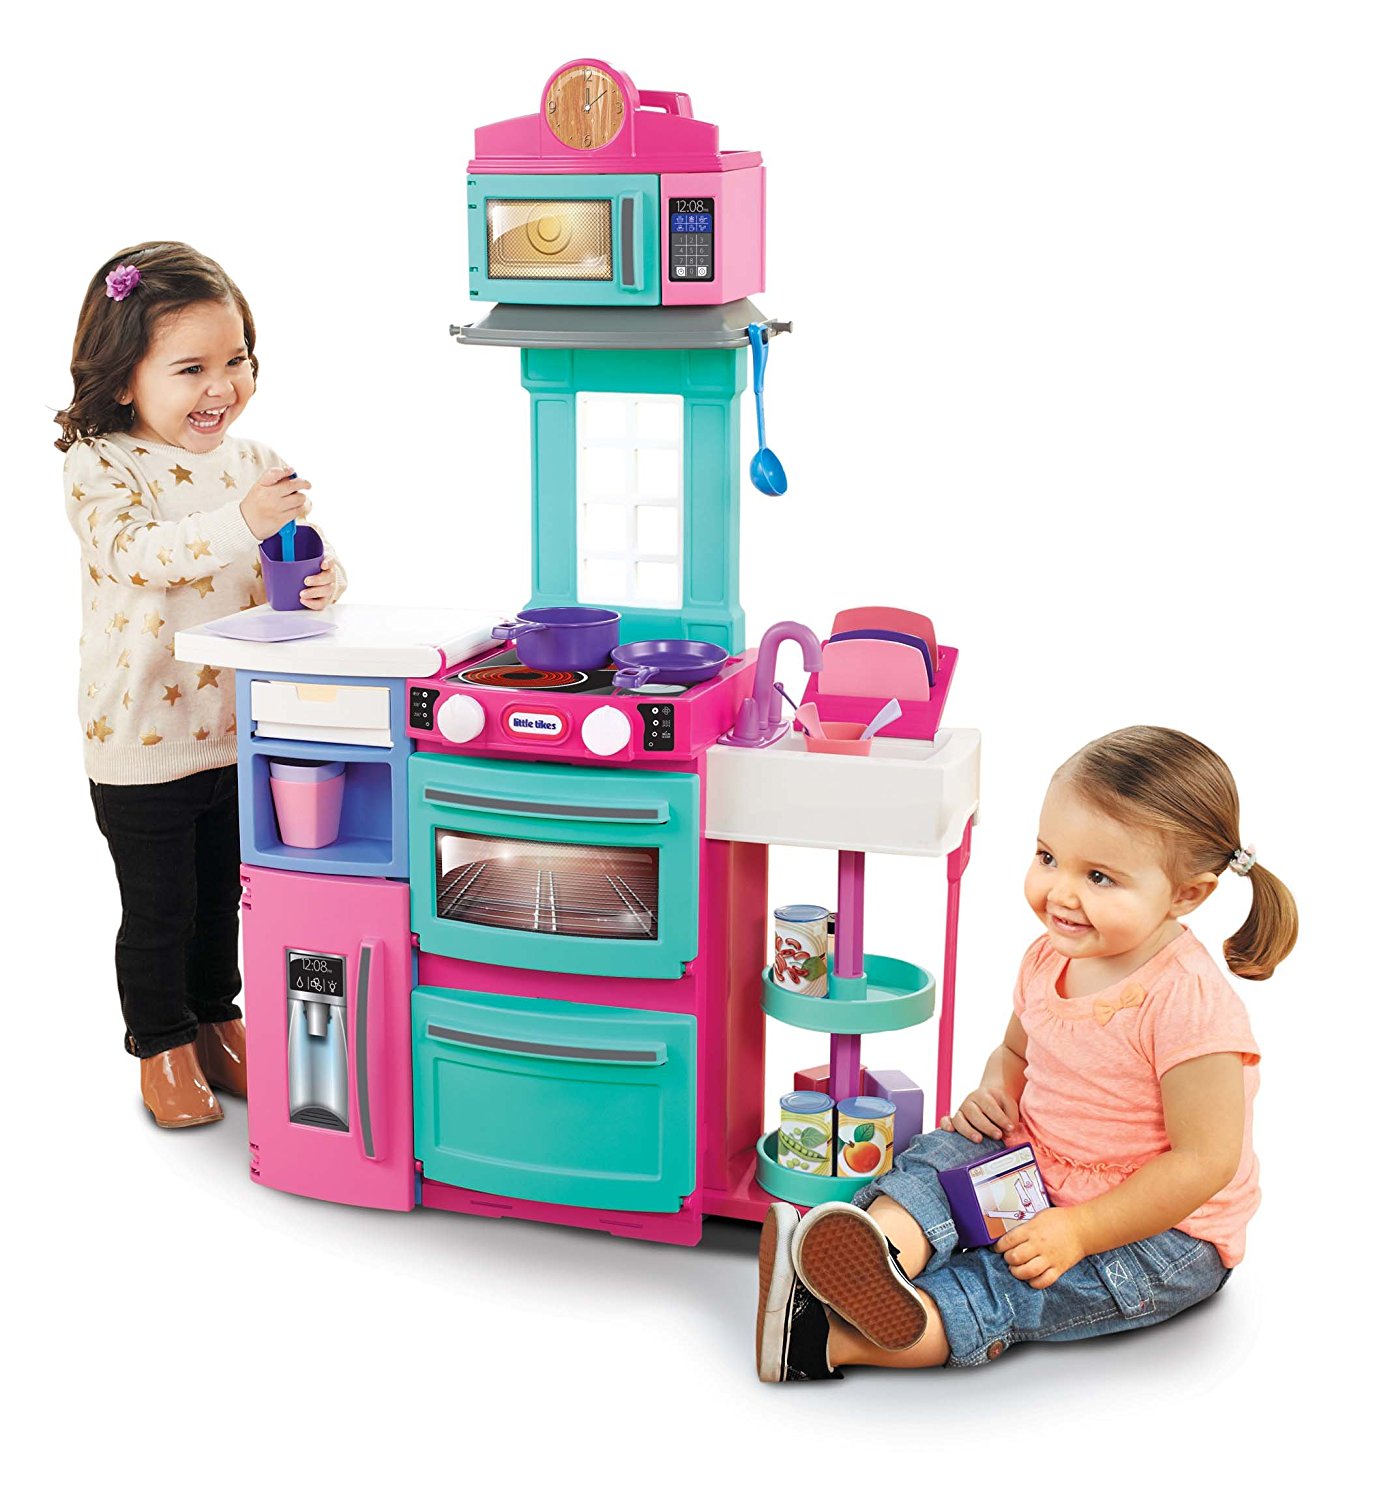 Top 10 Best Play Kitchen Sets for 2017 – Top Value Reviews